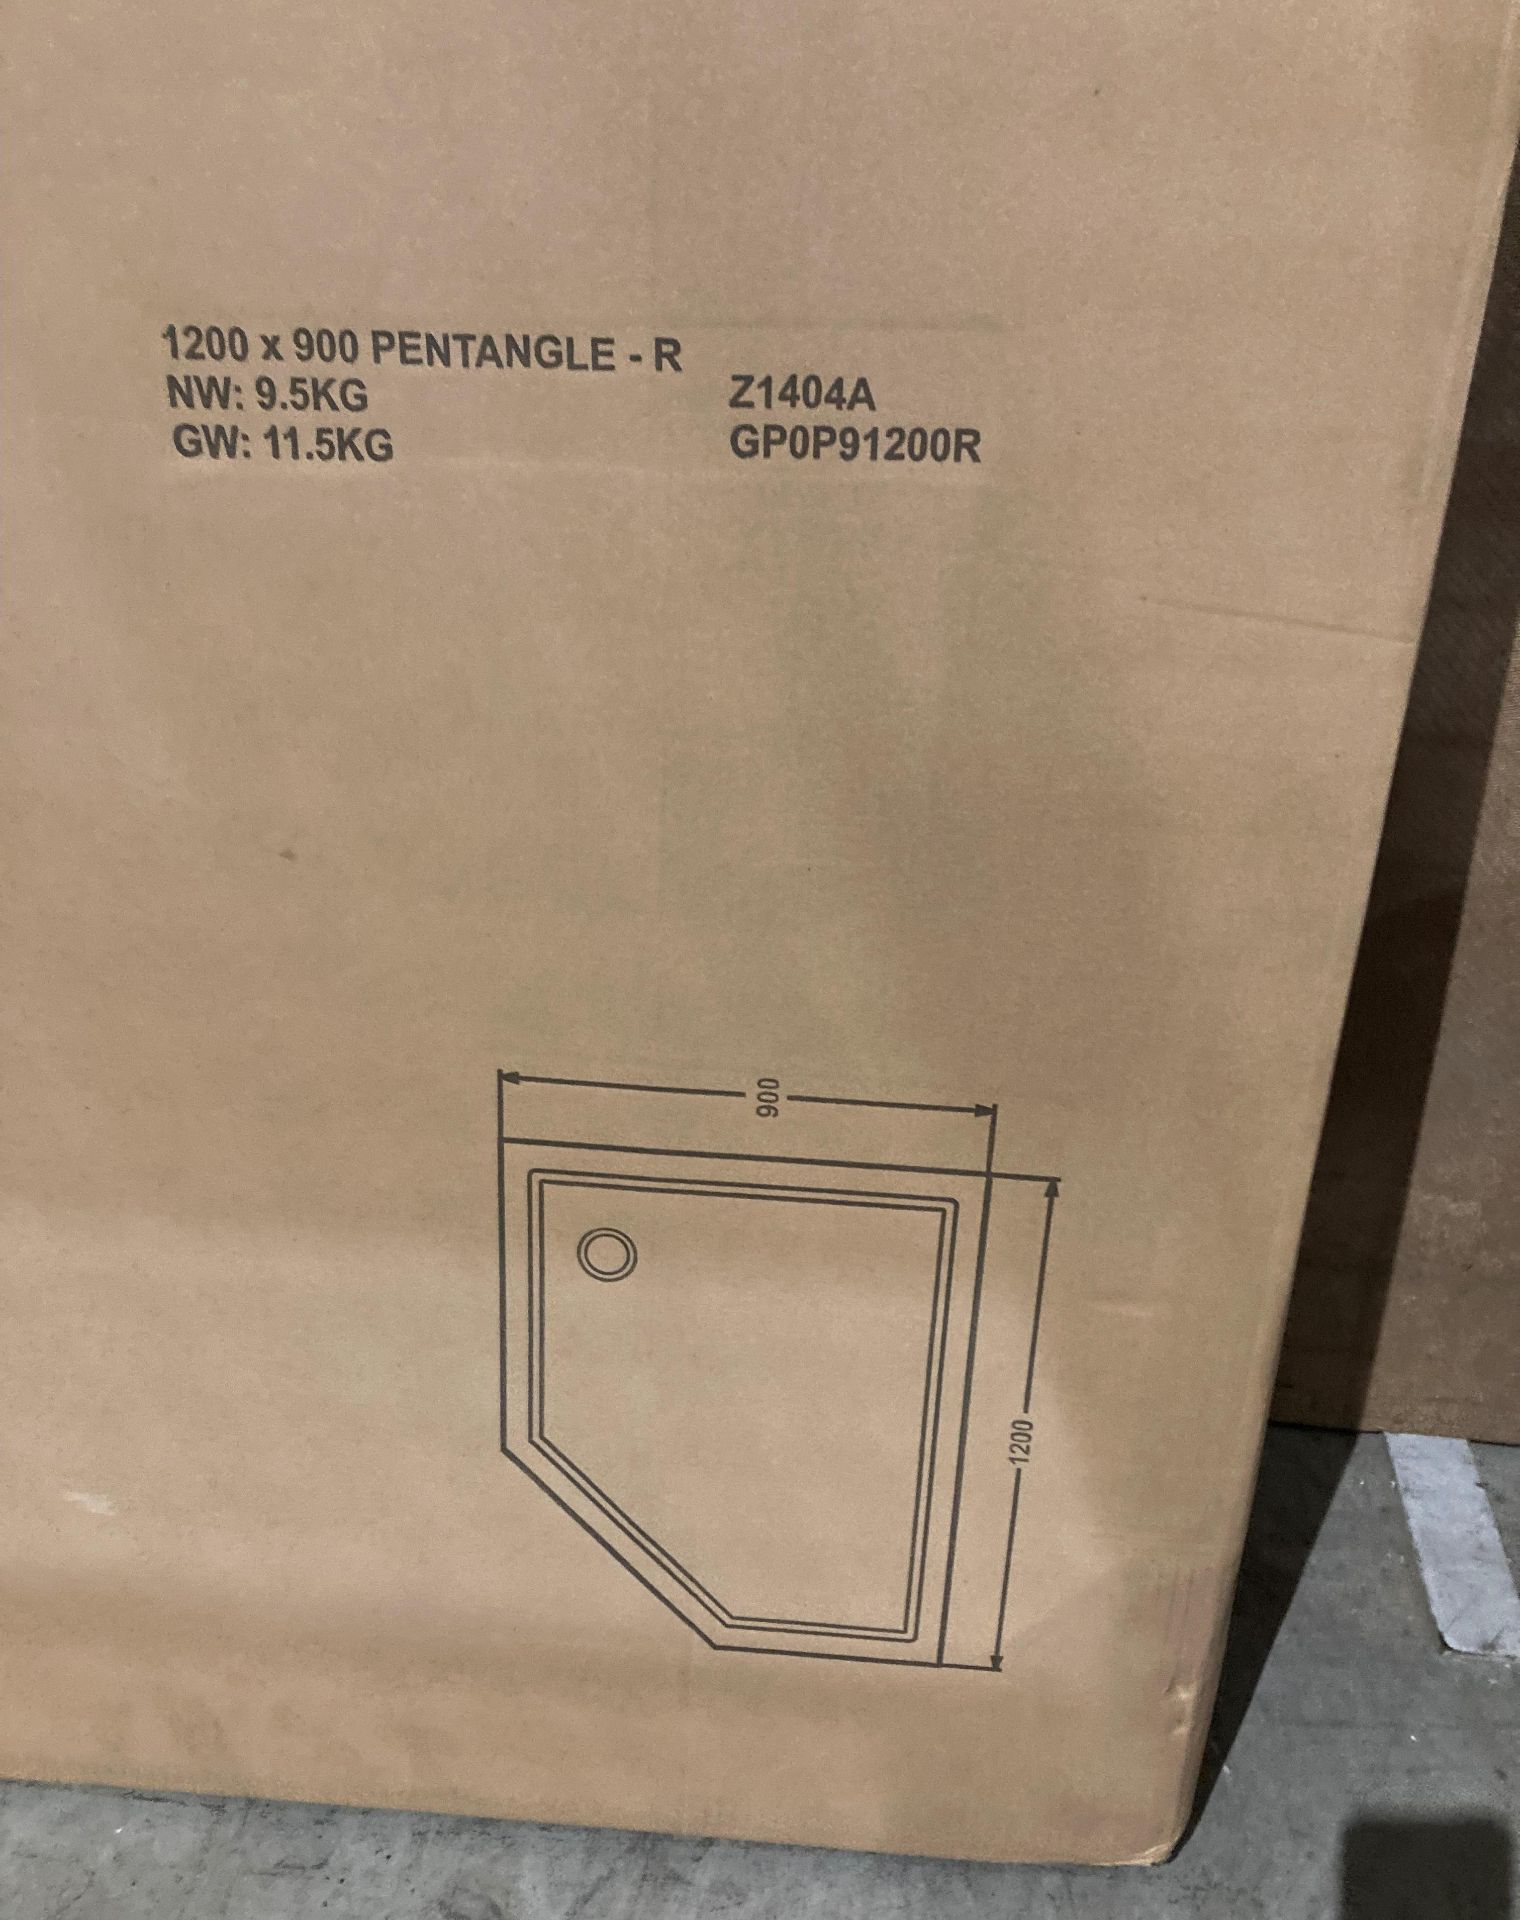 Grip pentangle-R shower tray 1200mm x 900mm new boxed (saleroom location: OUTSIDE MEZ) - Image 2 of 2